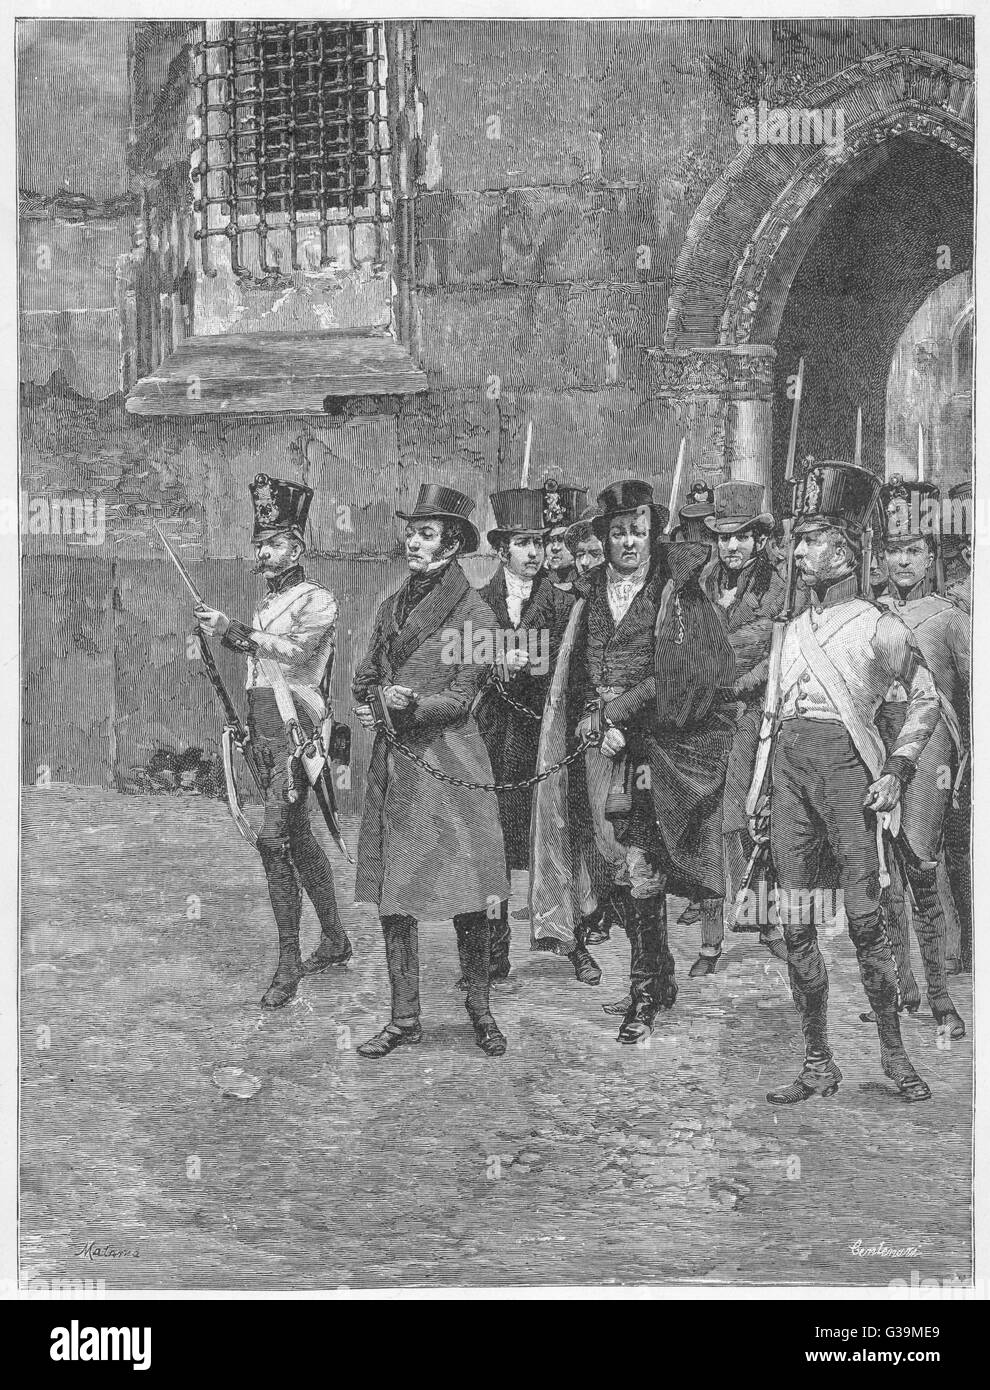 Members of the Carbonari  nationalist secret society are  arrested in Lombardy        Date: 1821 Stock Photo